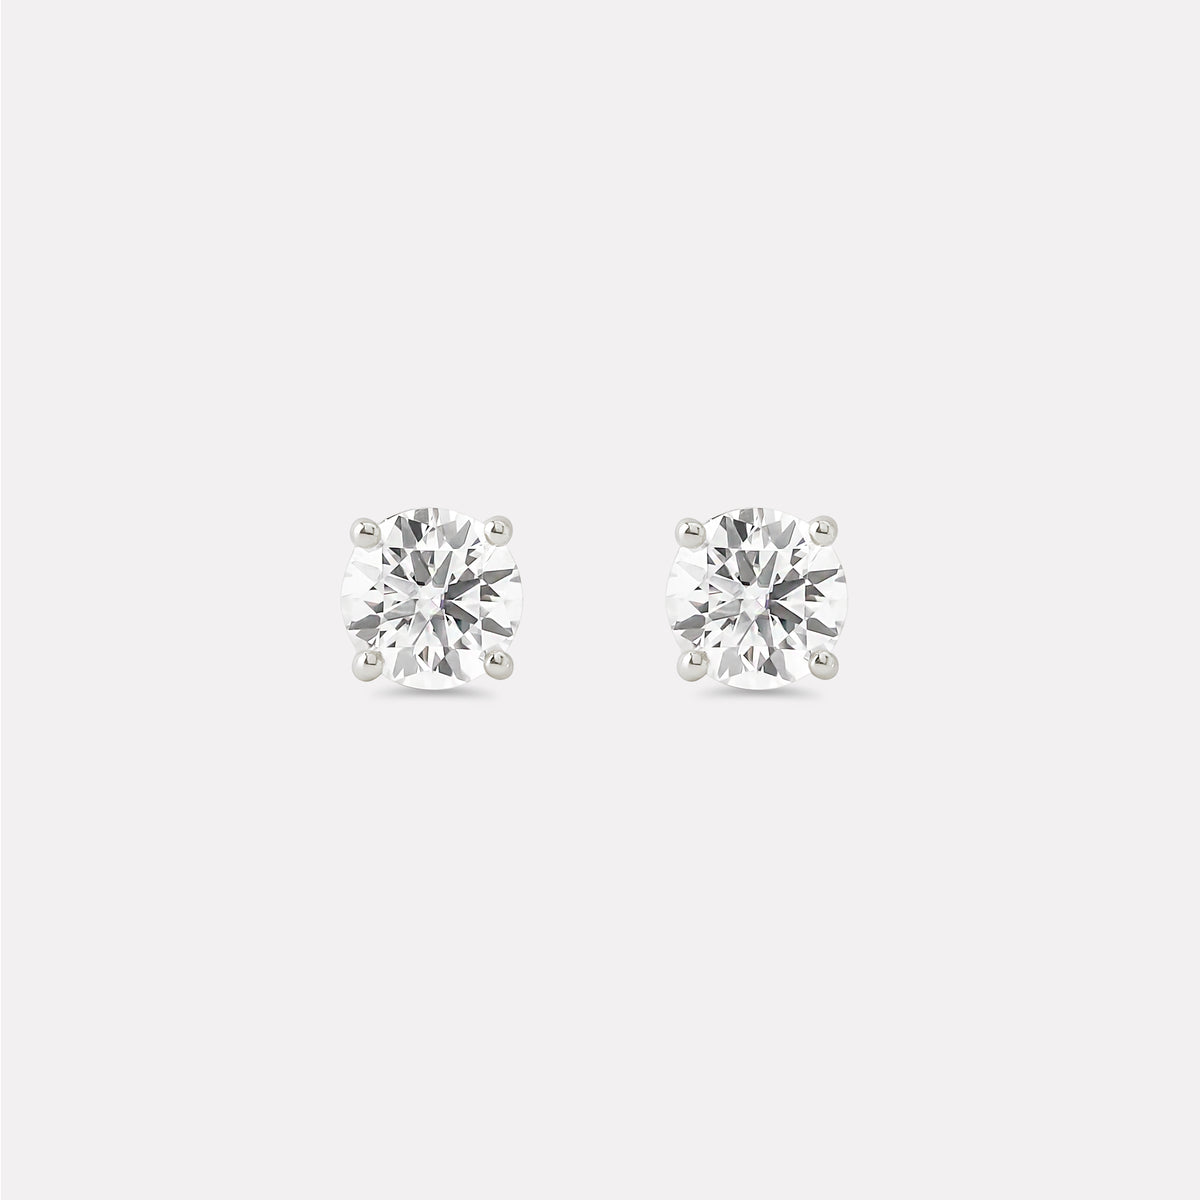 Round Brilliant Solitaire Earrings in Basket Setting